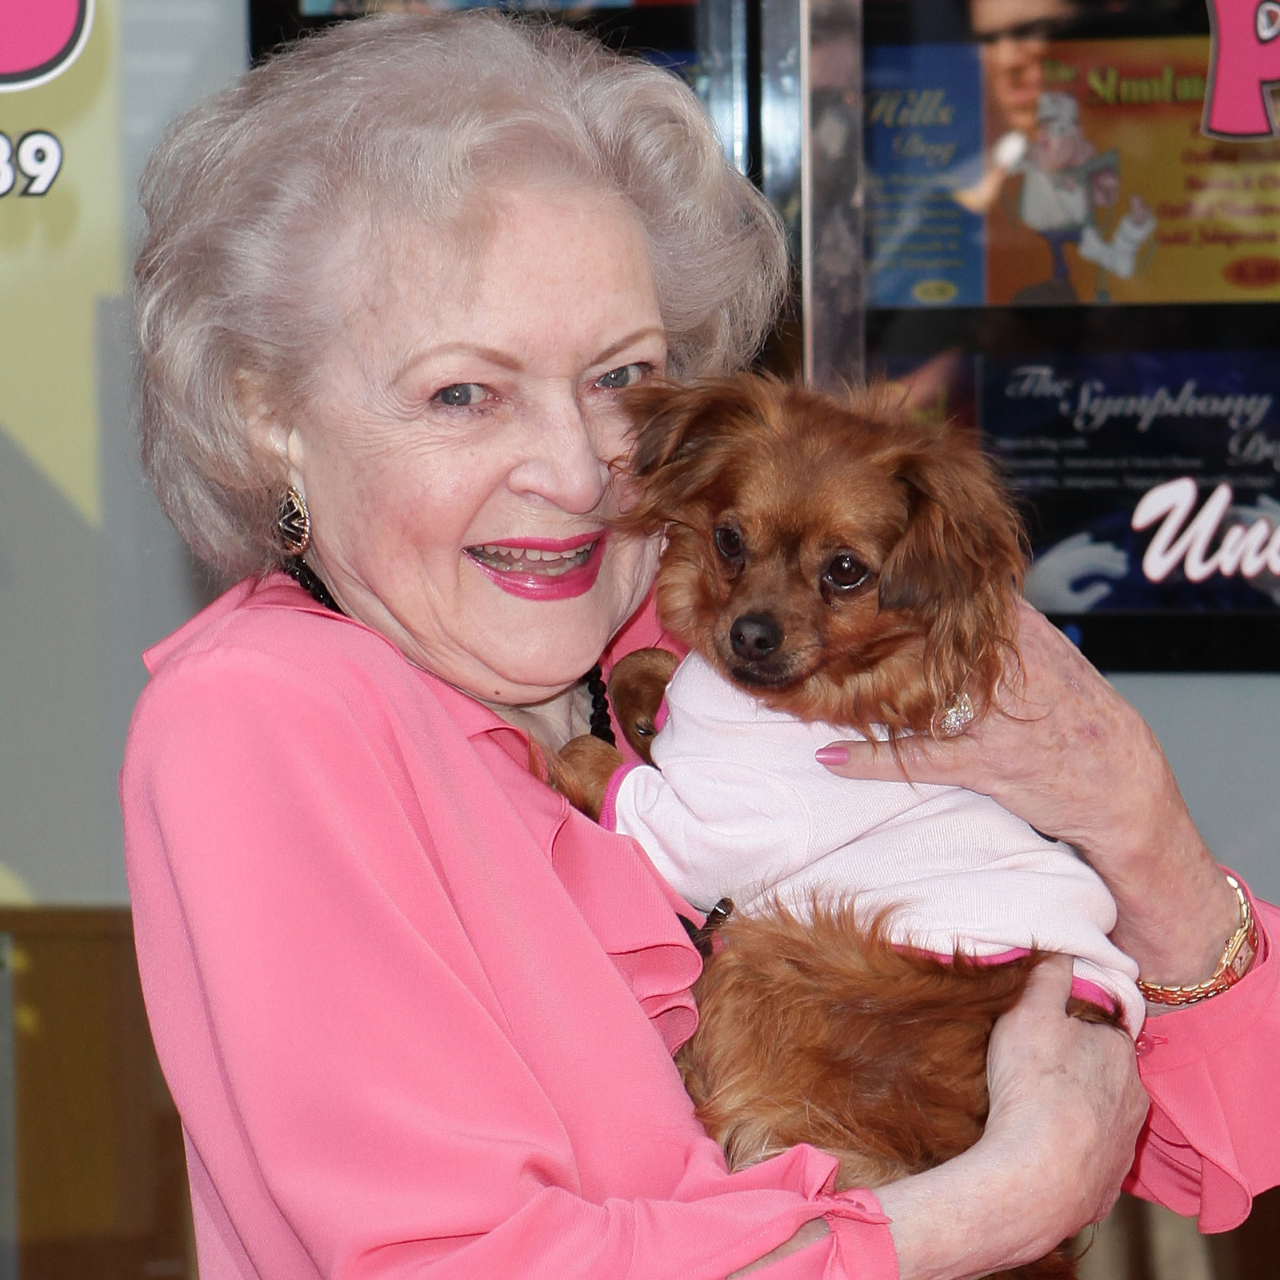 Betty White at the unveilling of the "Naked" hot dog at Pink's Hot Dog